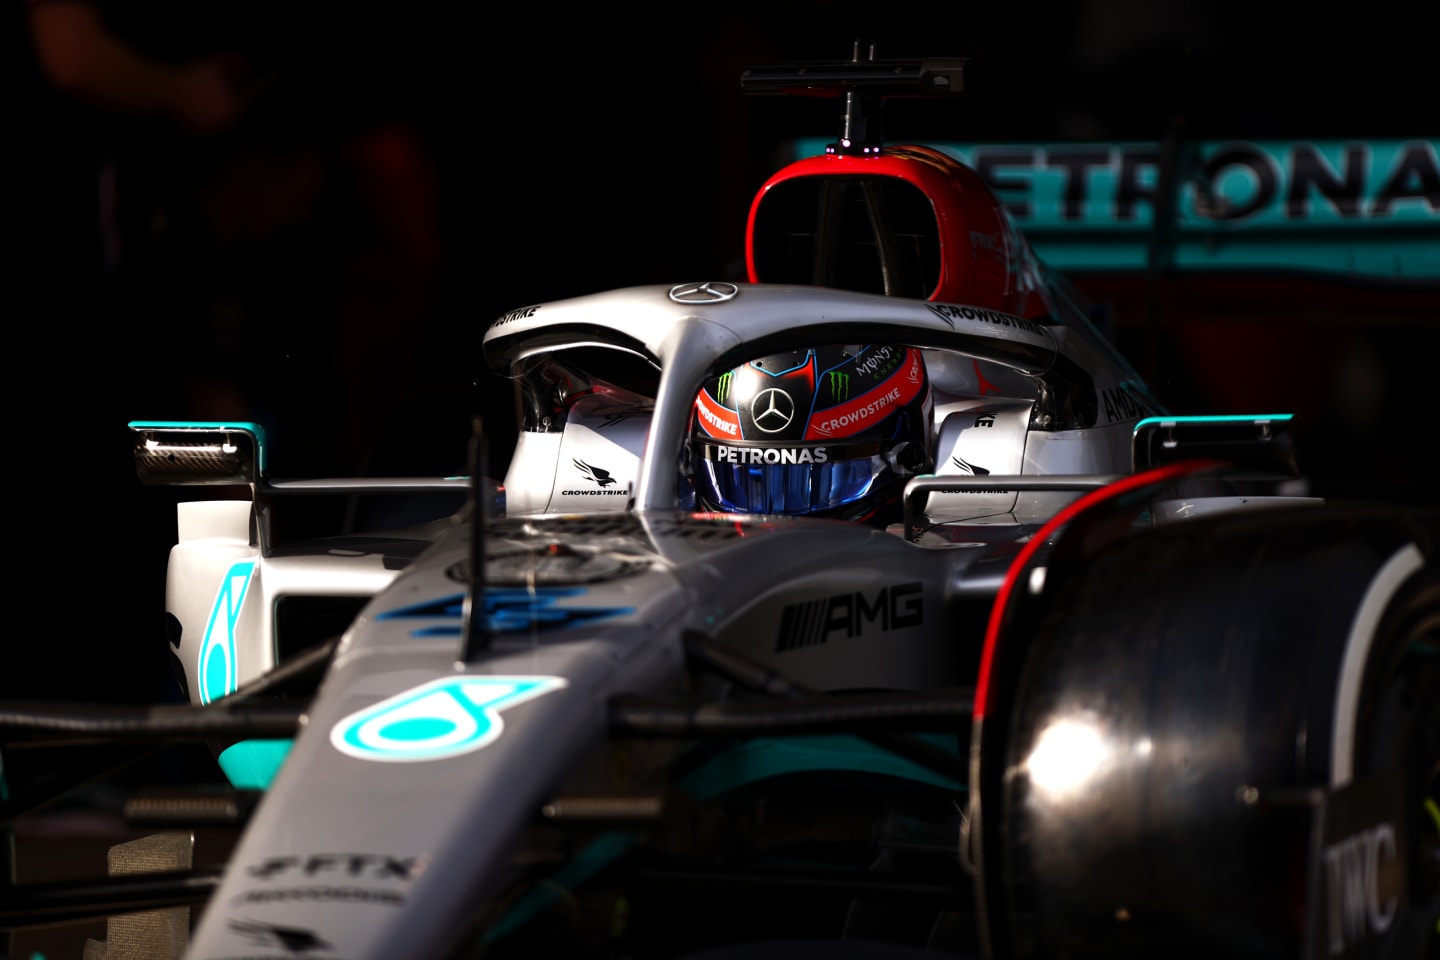 BARCELONA, SPAIN - FEBRUARY 24: George Russell of Great Britain driving the (63) Mercedes AMG Petronas F1 Team W13 in the Pitlane during Day Two of F1 Testing at Circuit de Barcelona-Catalunya on February 24, 2022 in Barcelona, Spain. (Photo by Dan Istitene - Formula 1/Formula 1 via Getty Images)